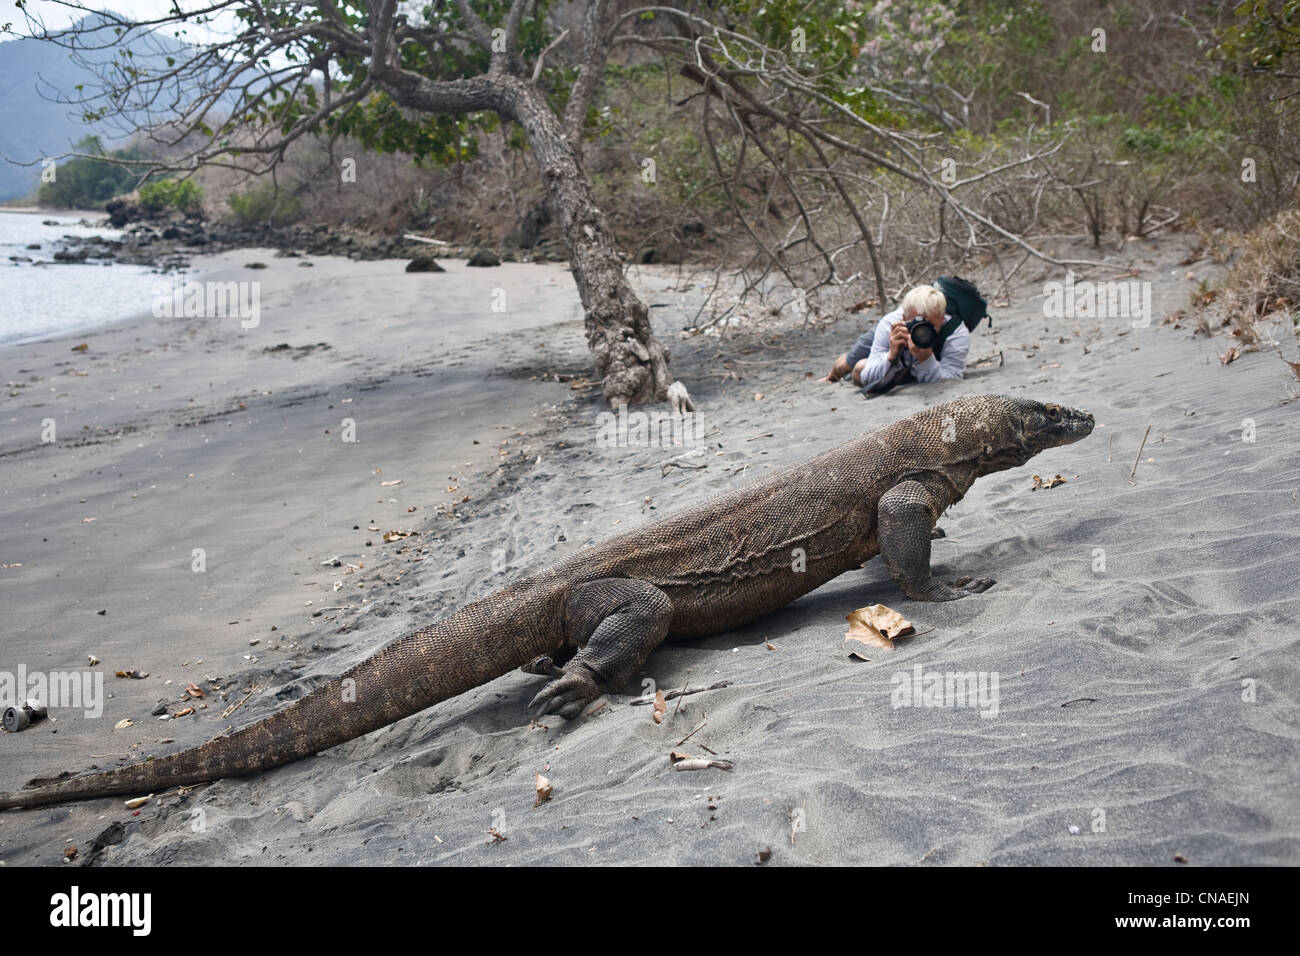 A photographer takes pictures of a Komodo dragon, Varanus komodensis, as it wanders the shoreline of Rinca Island. Indonesia. Stock Photo